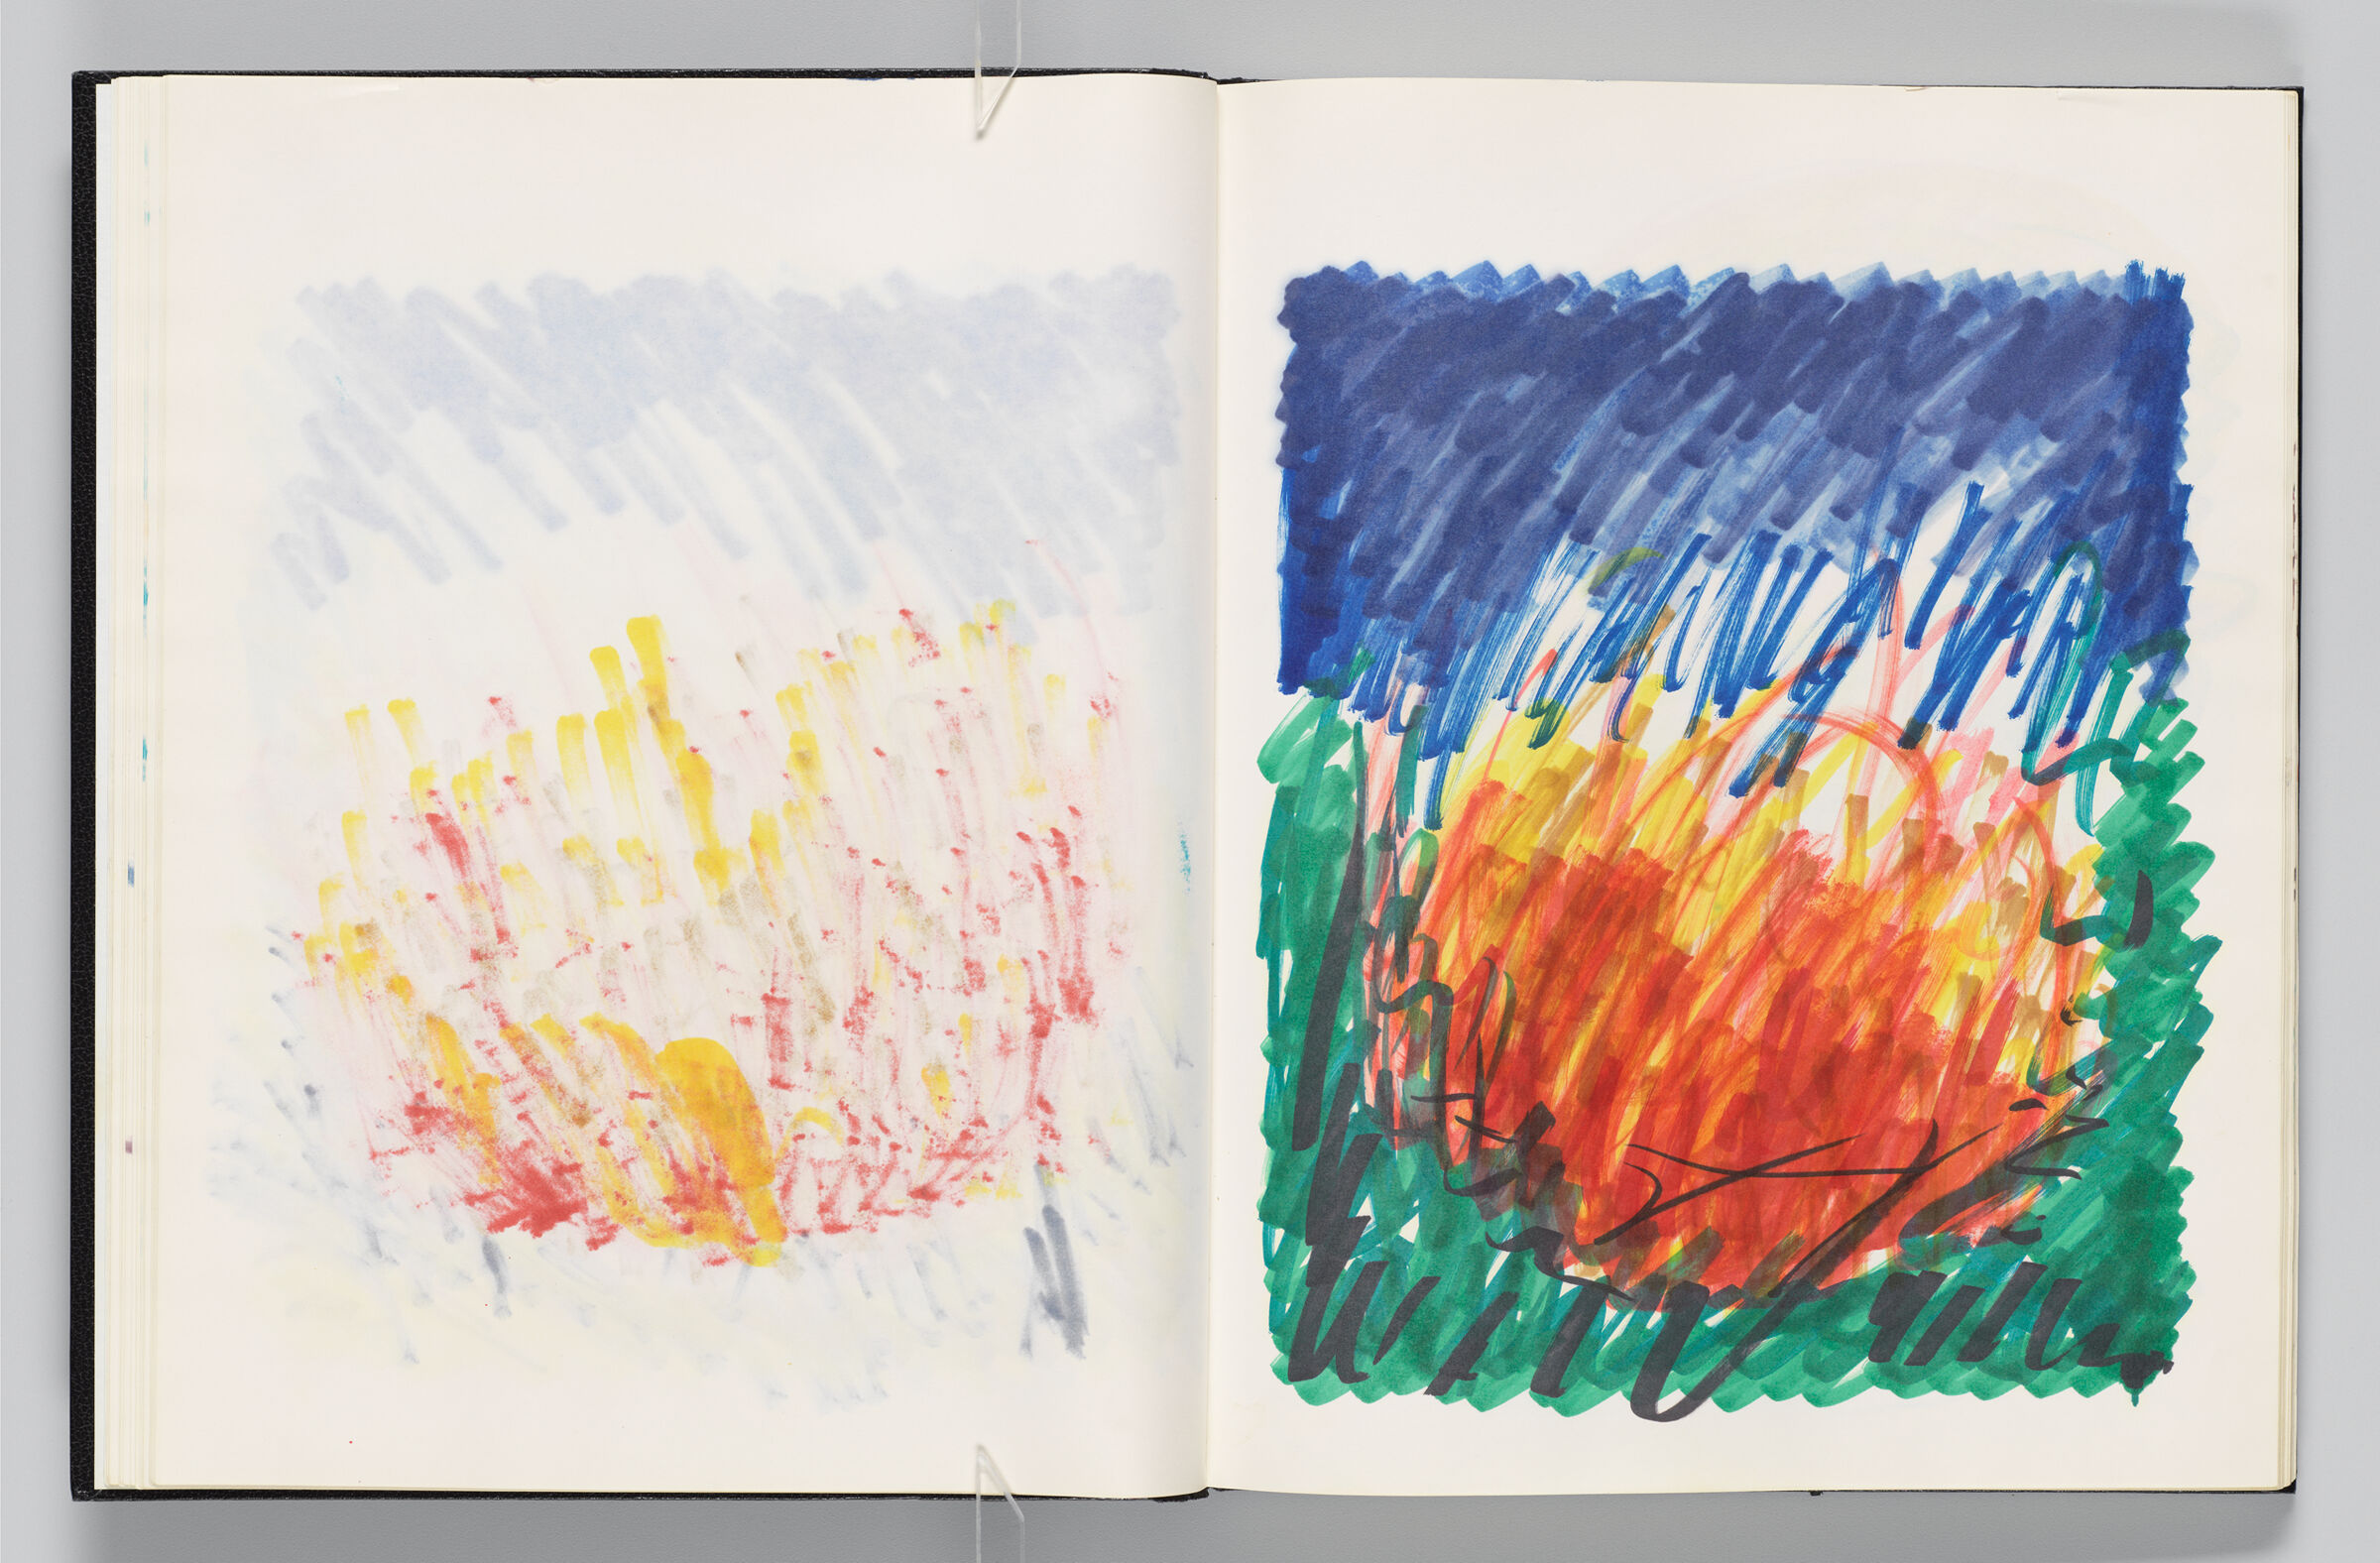 Untitled (Bleed-Through Of Previous Page, Left Page); Untitled (Abstract Landscape, Right Page)